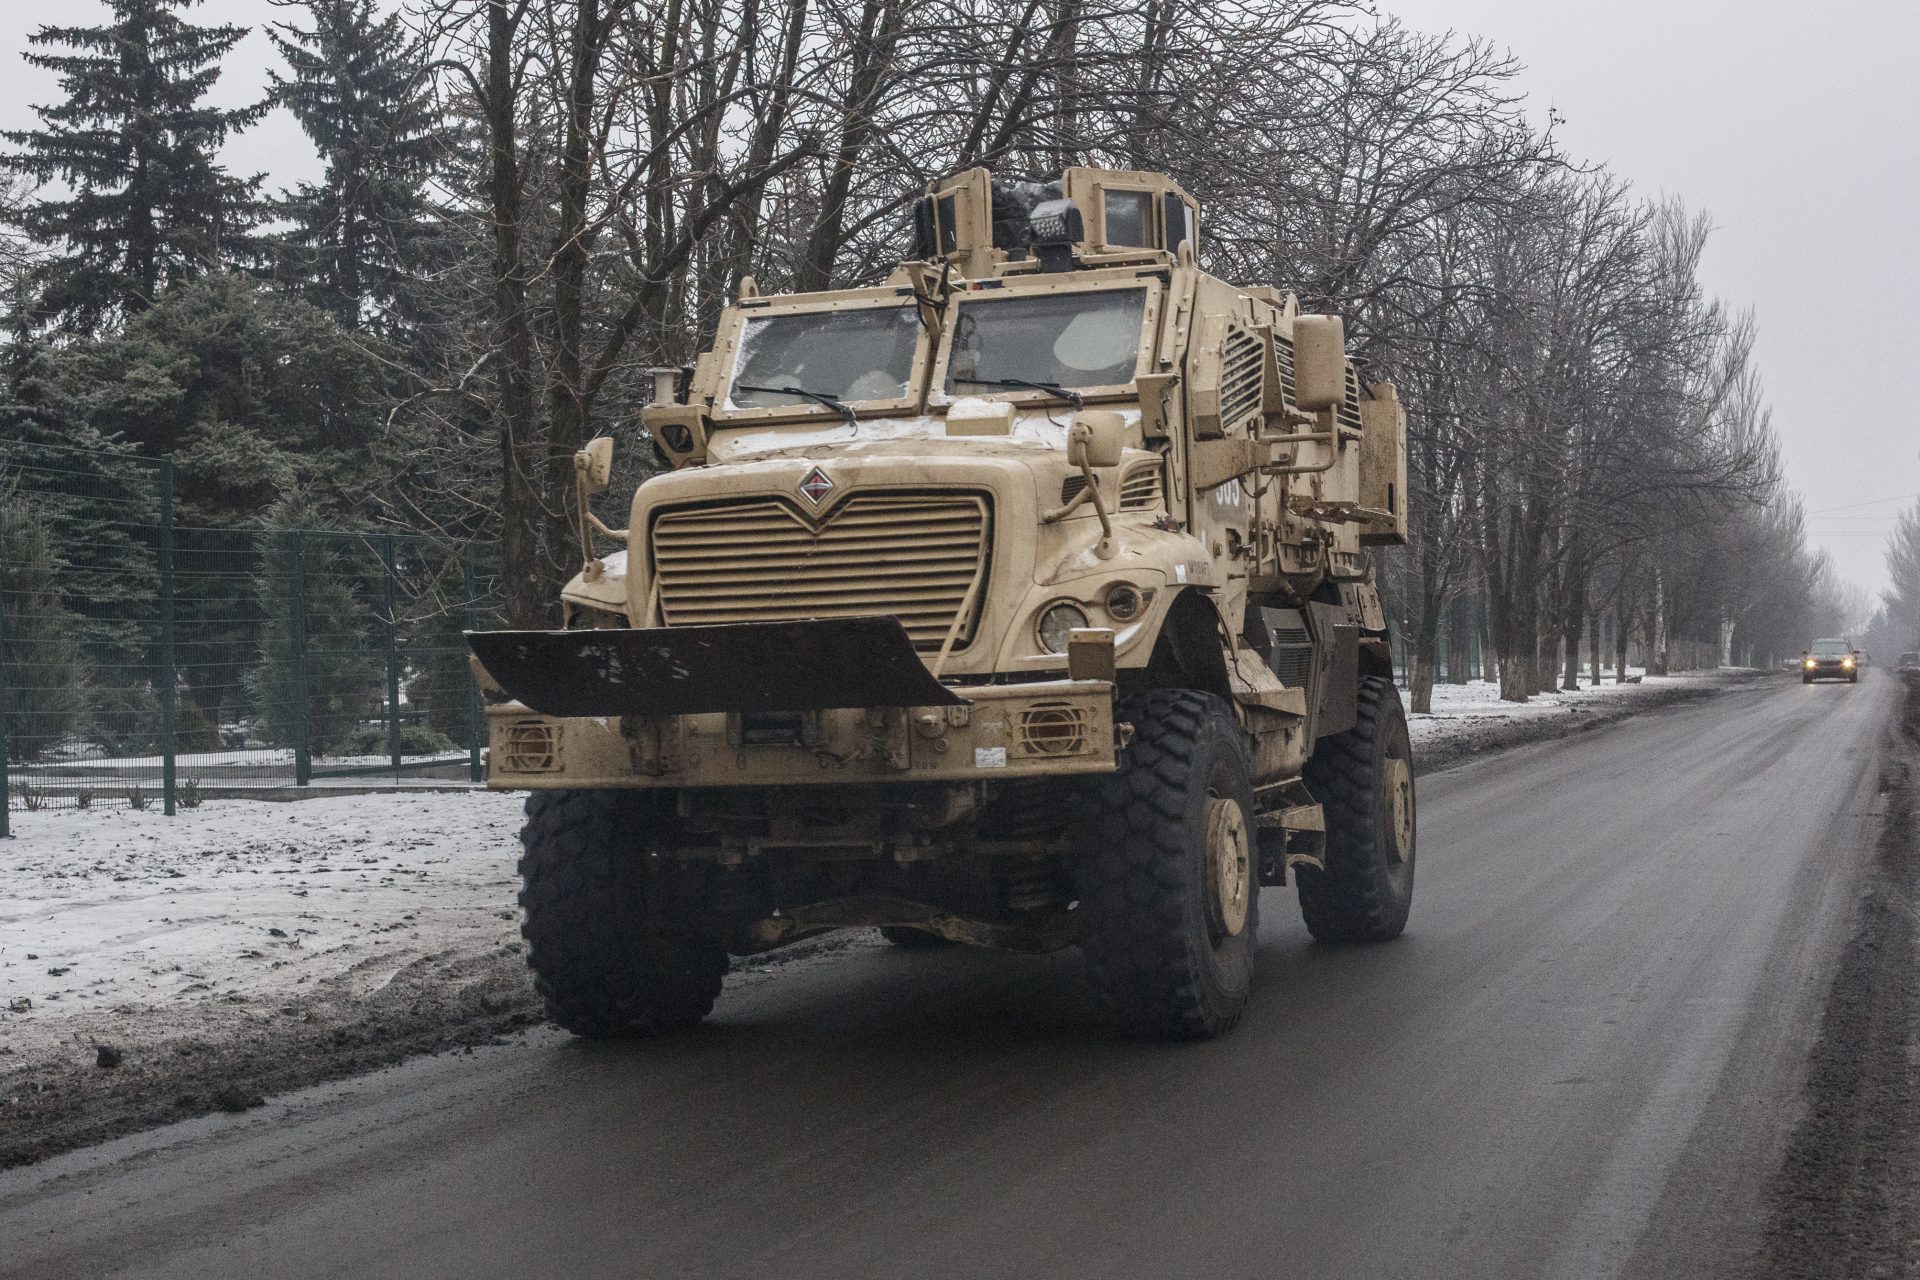 Gripping footage reveals remarkable performance of U.S. military vehicle